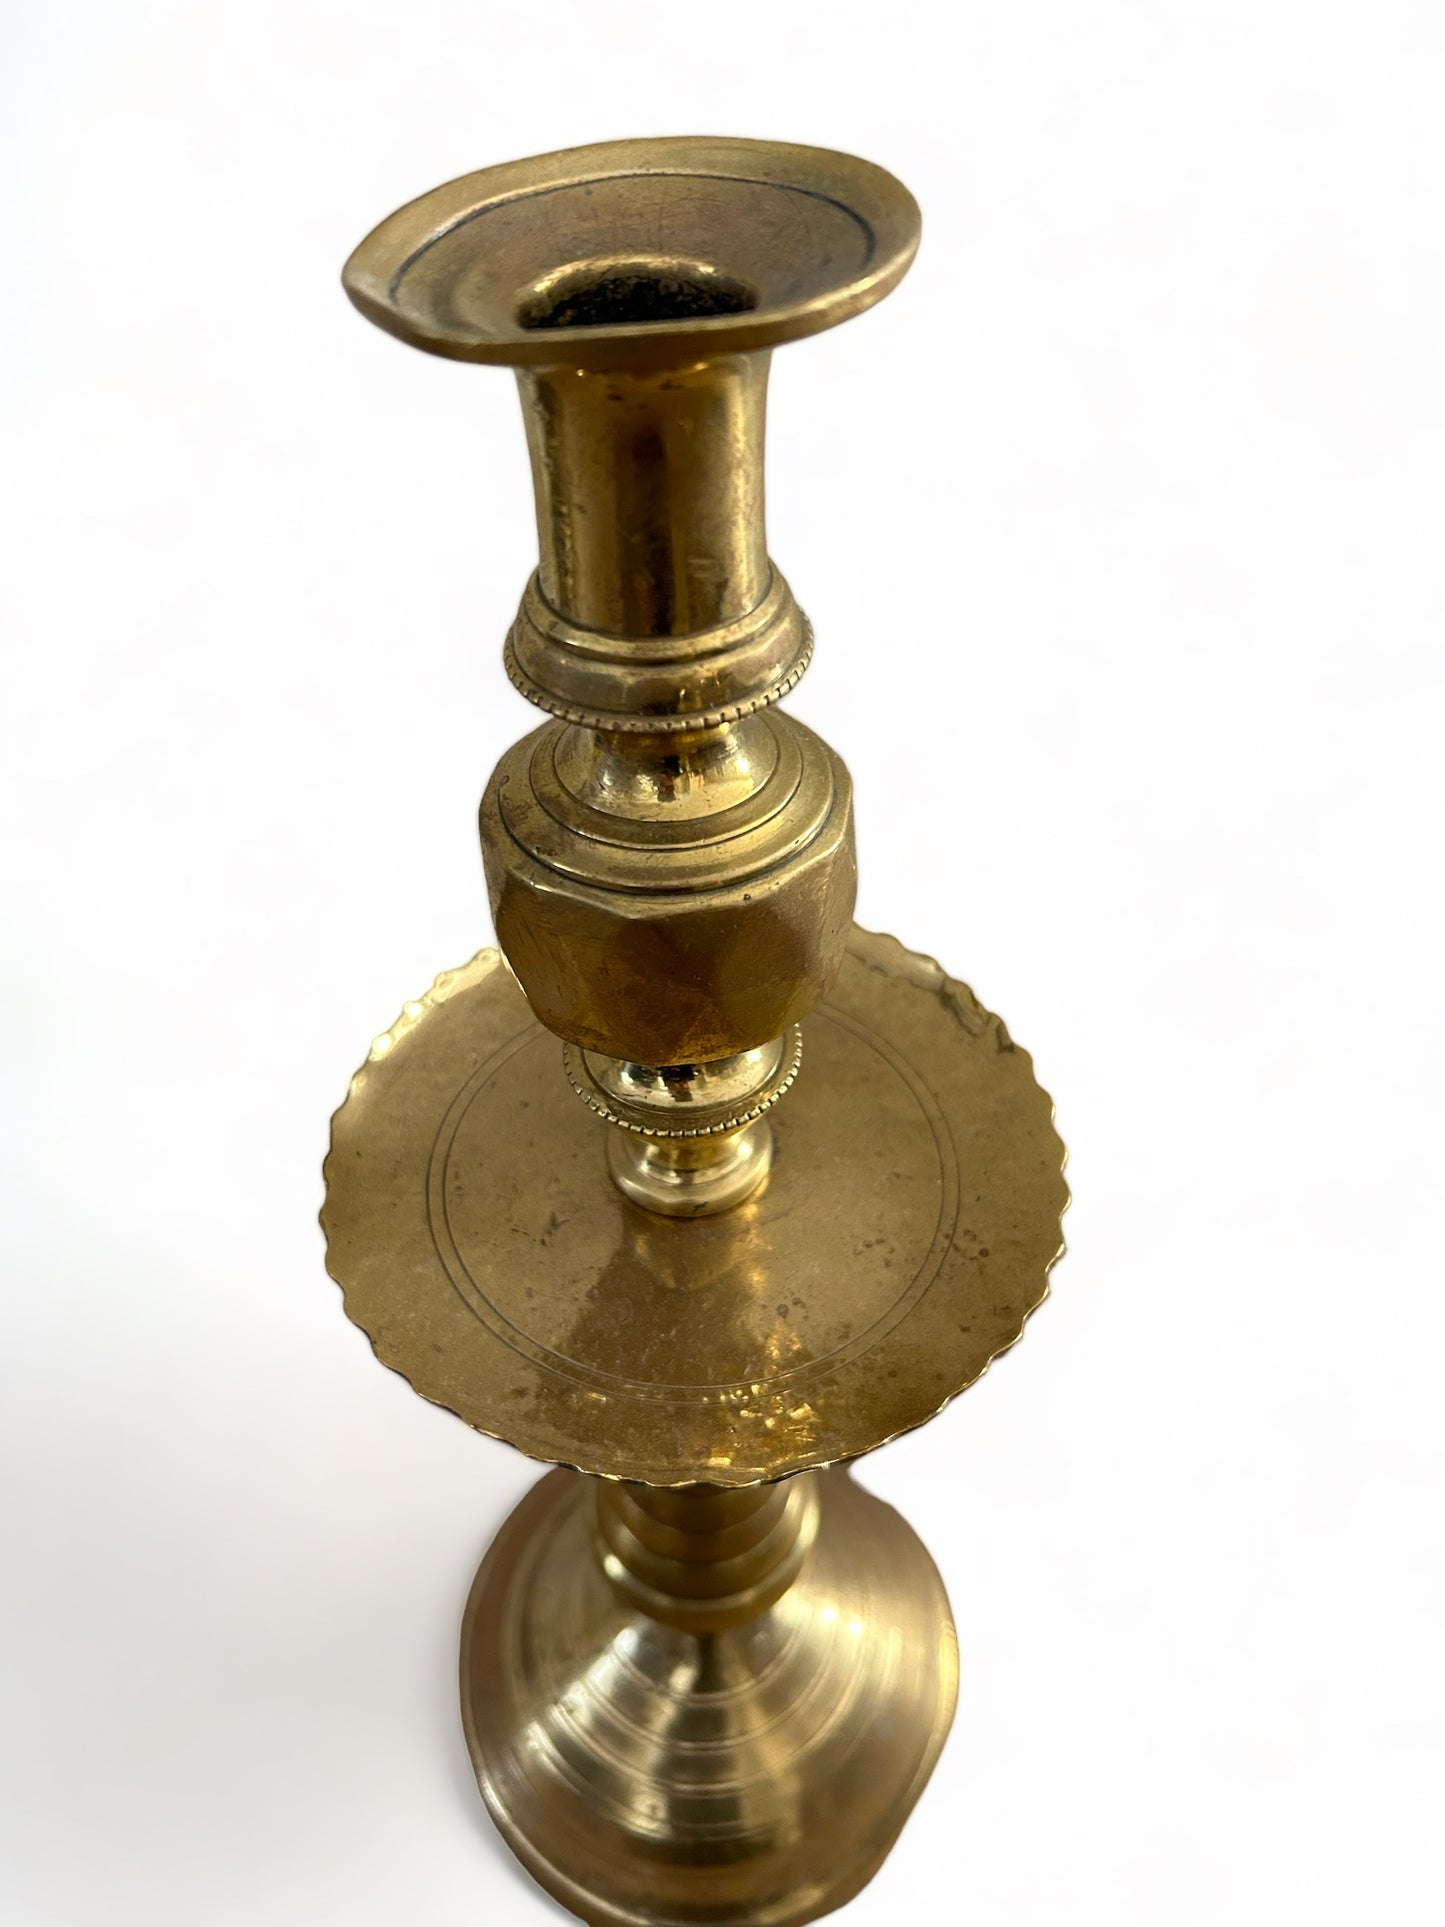 Vintage copper Riad candlestick from Morocco